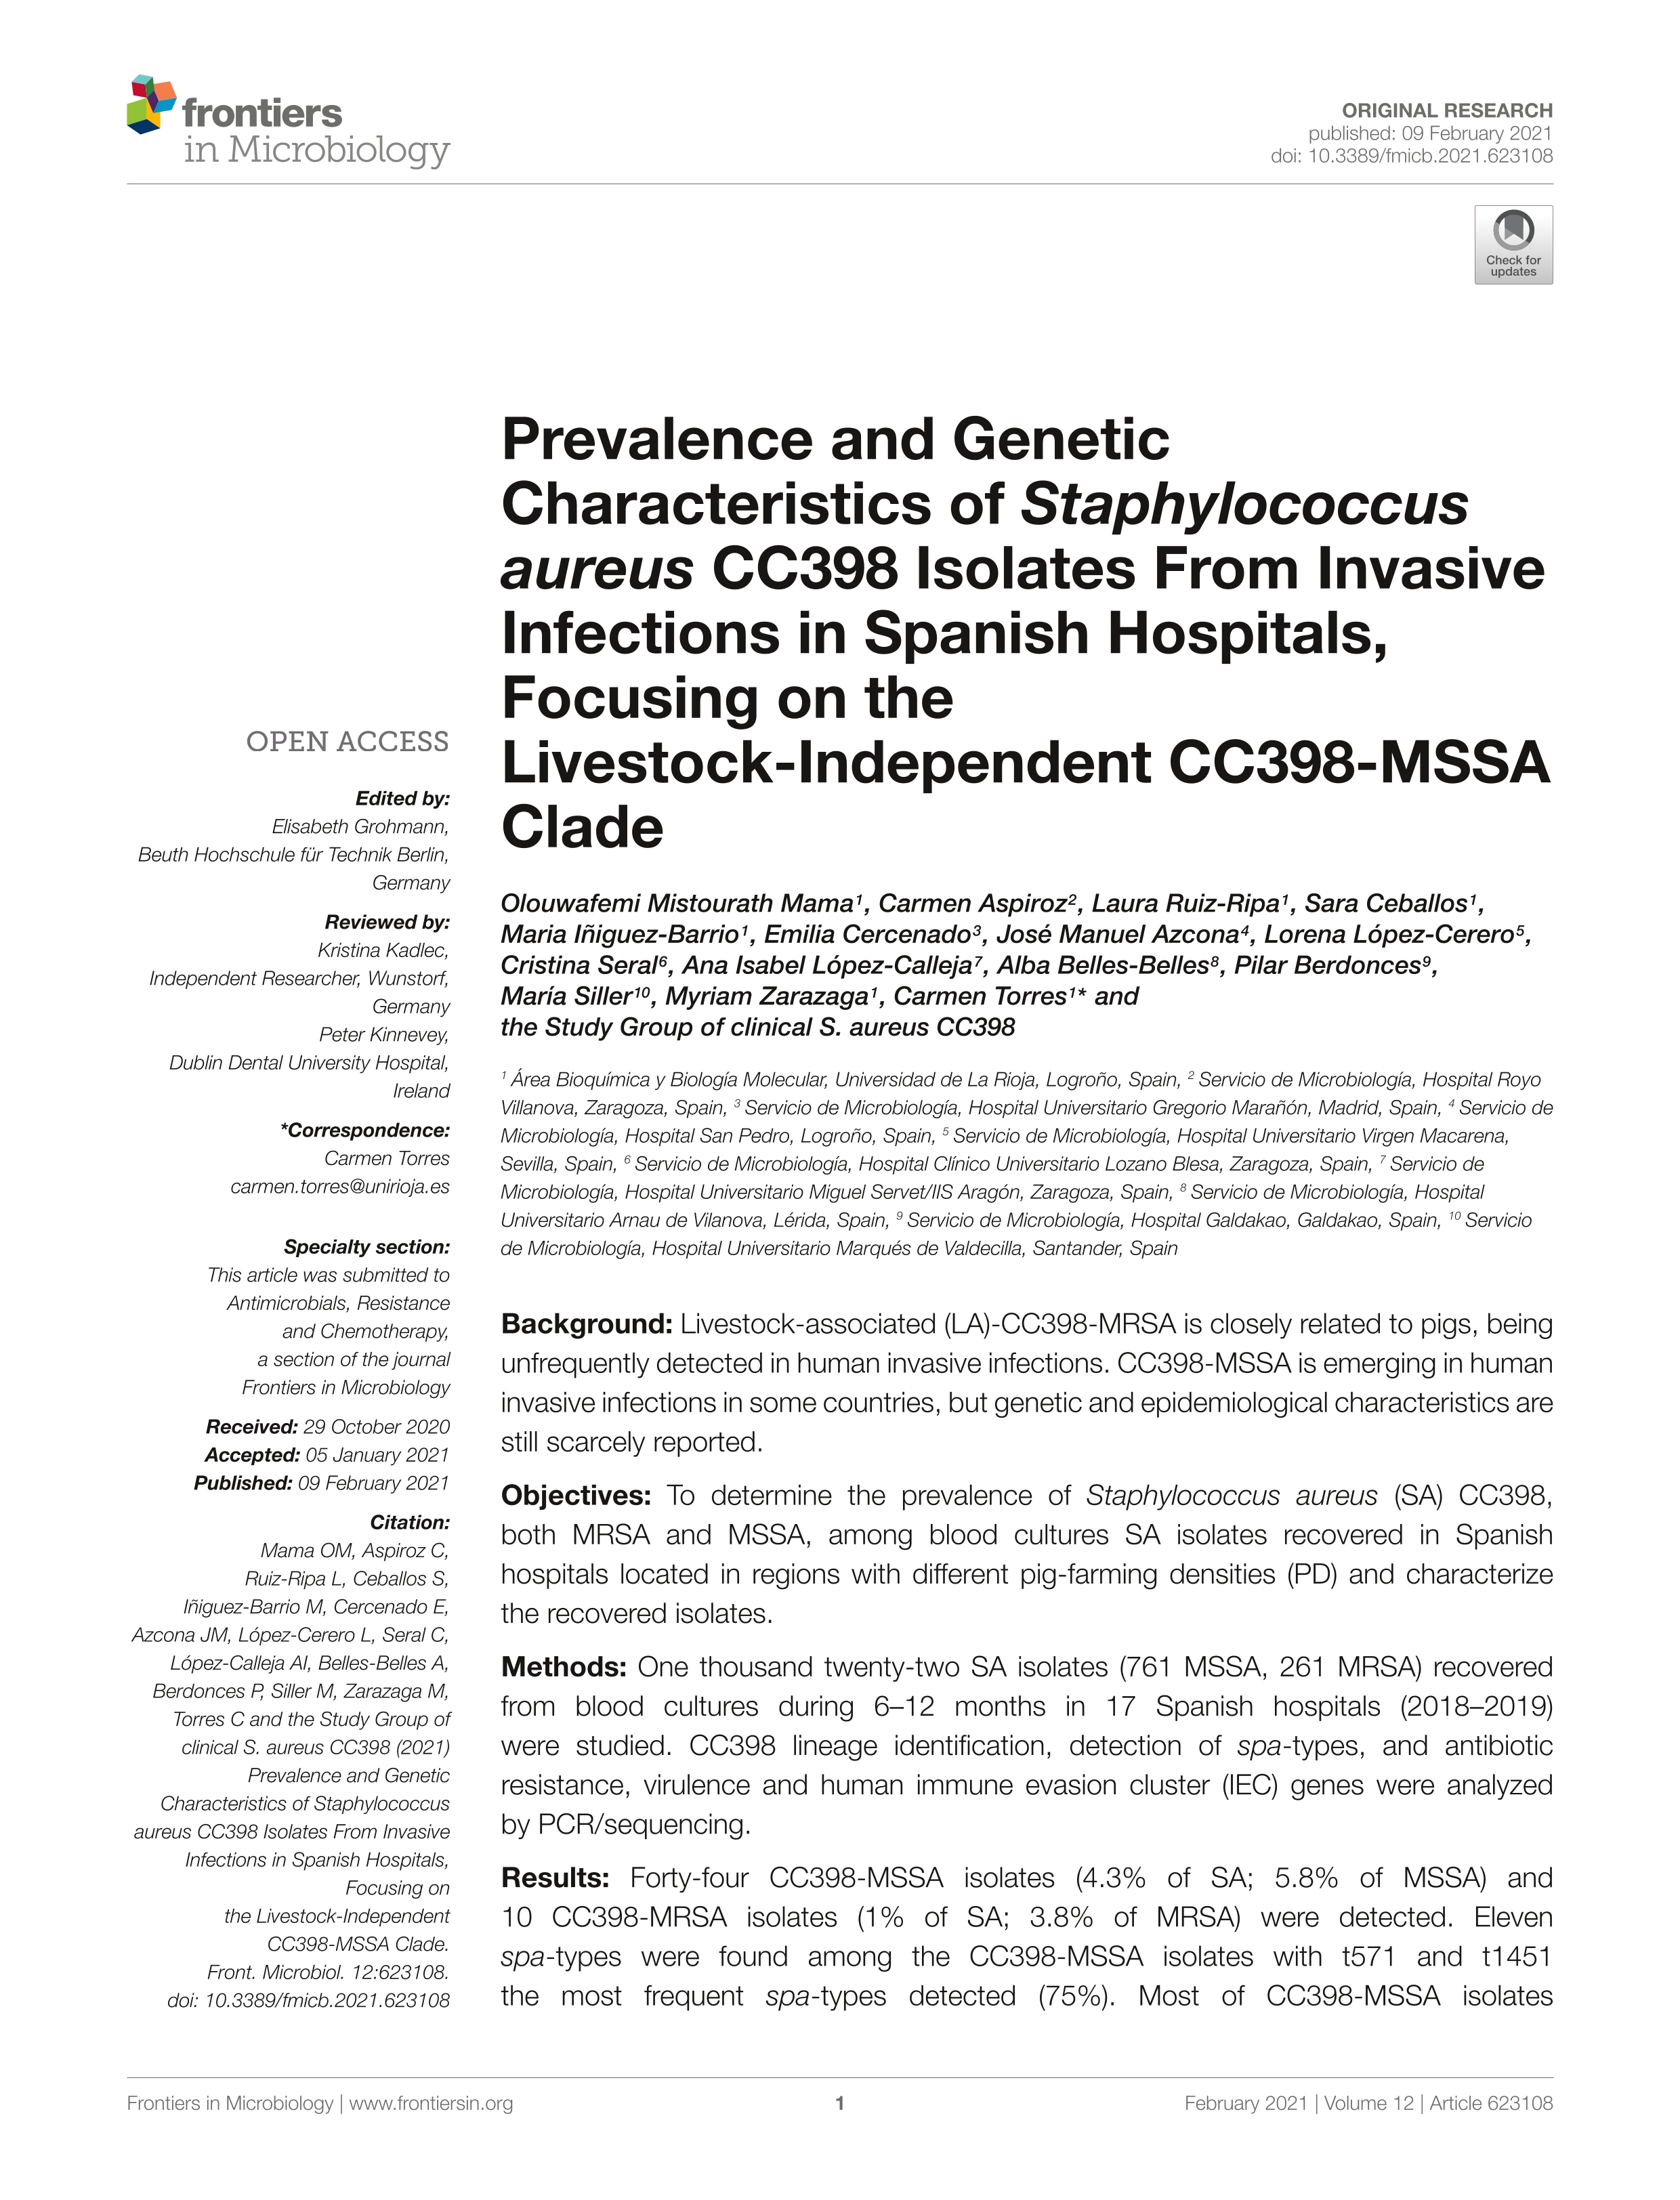 Prevalence and genetic characteristics of Staphylococcus aureus CC398 isolates from invasive infections in spanish hospitals, focusing on the livestock-independent CC398-MSSA clade